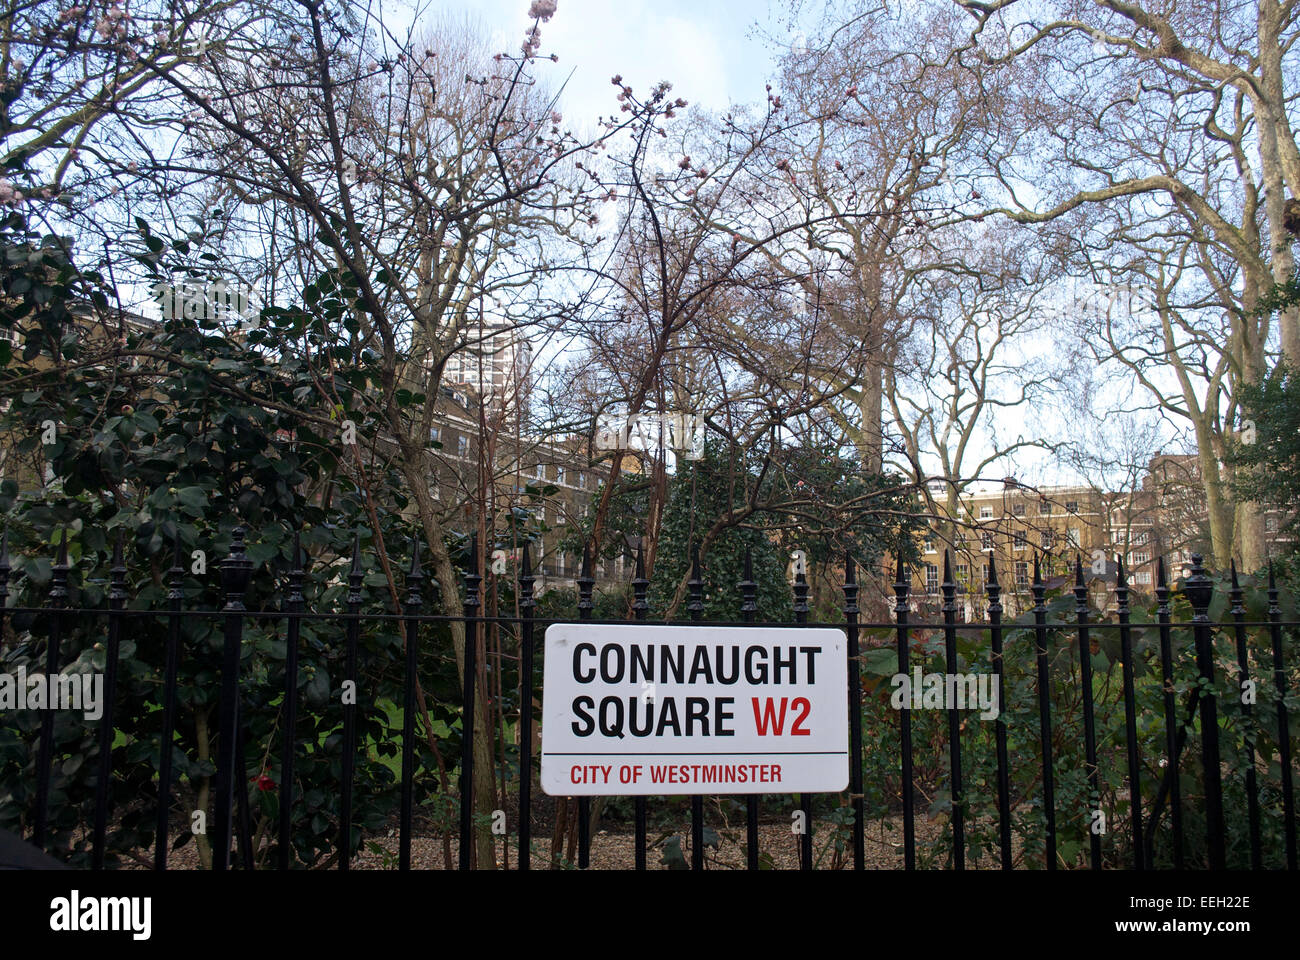 Connaught Square, Bayswater, London, W2, City of Westminster, Stock Photo